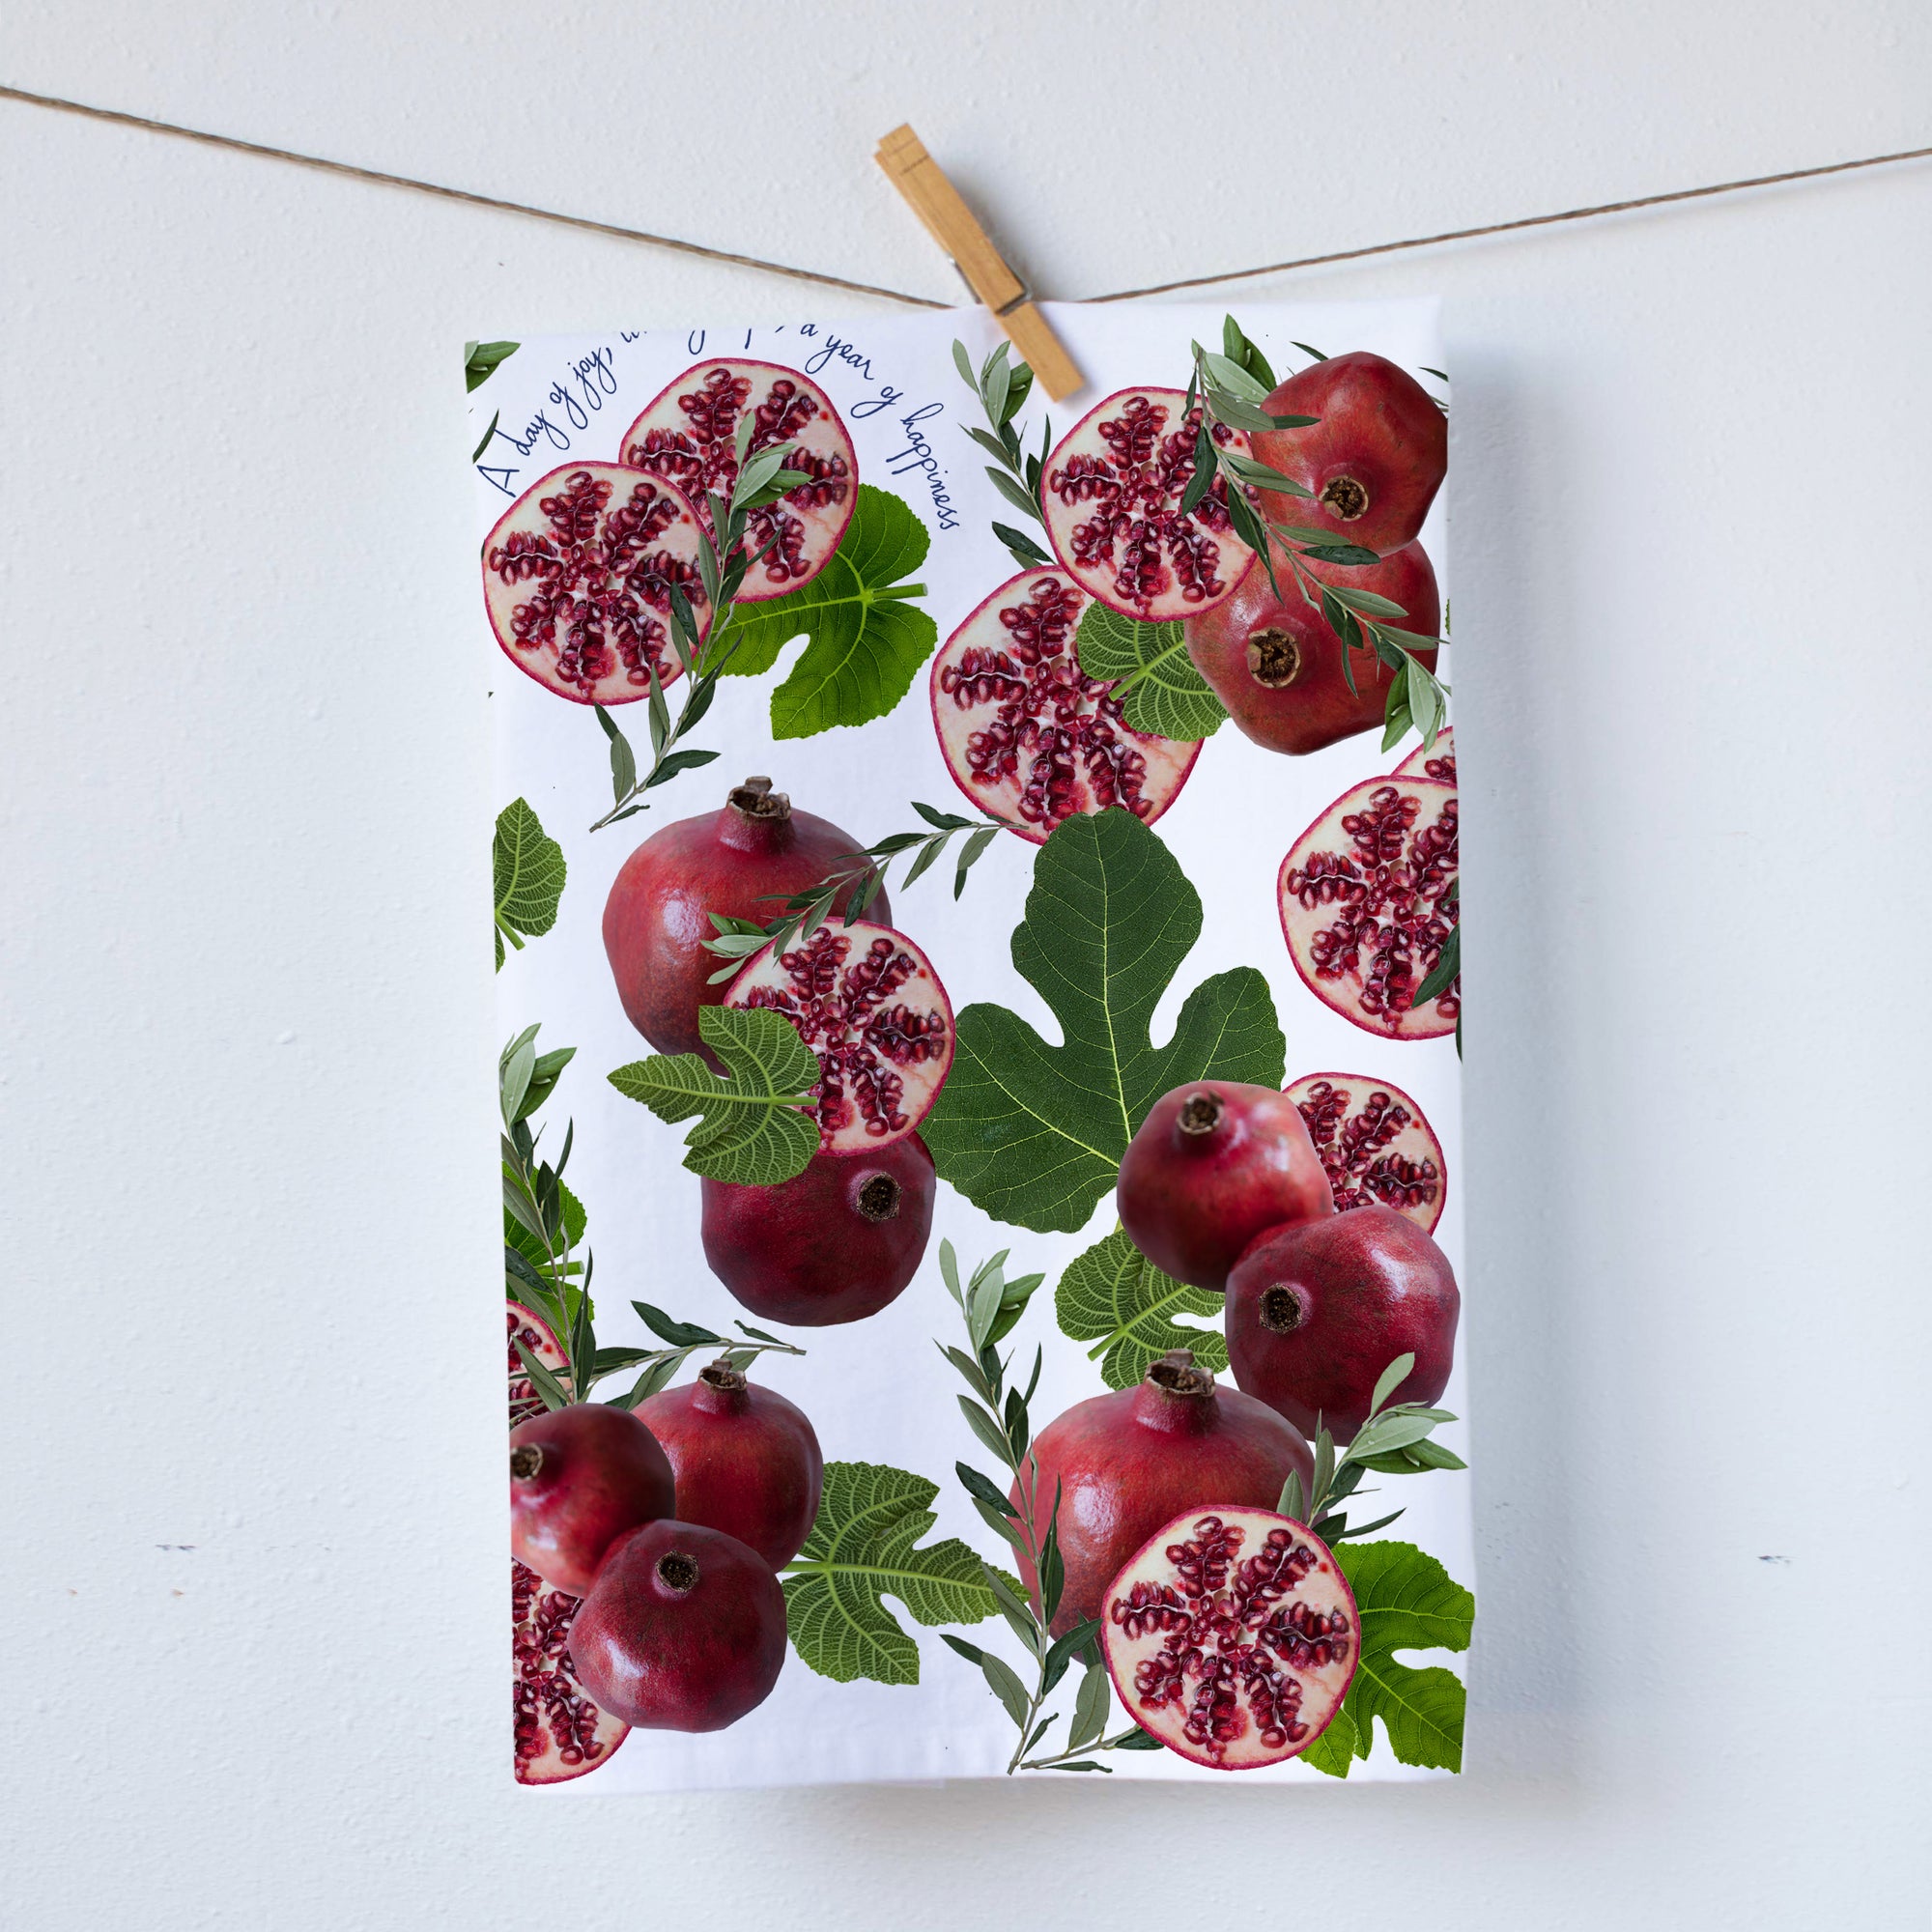 Pomegranate kitchen towel. Beautiful Pomegranate kitchen towel super bright purple and detailed. Sliced Pomegranate have visibility of beautiful seeds. Hostess gift. Pauline Stevens Photography. 19" x 28" (10053221005)